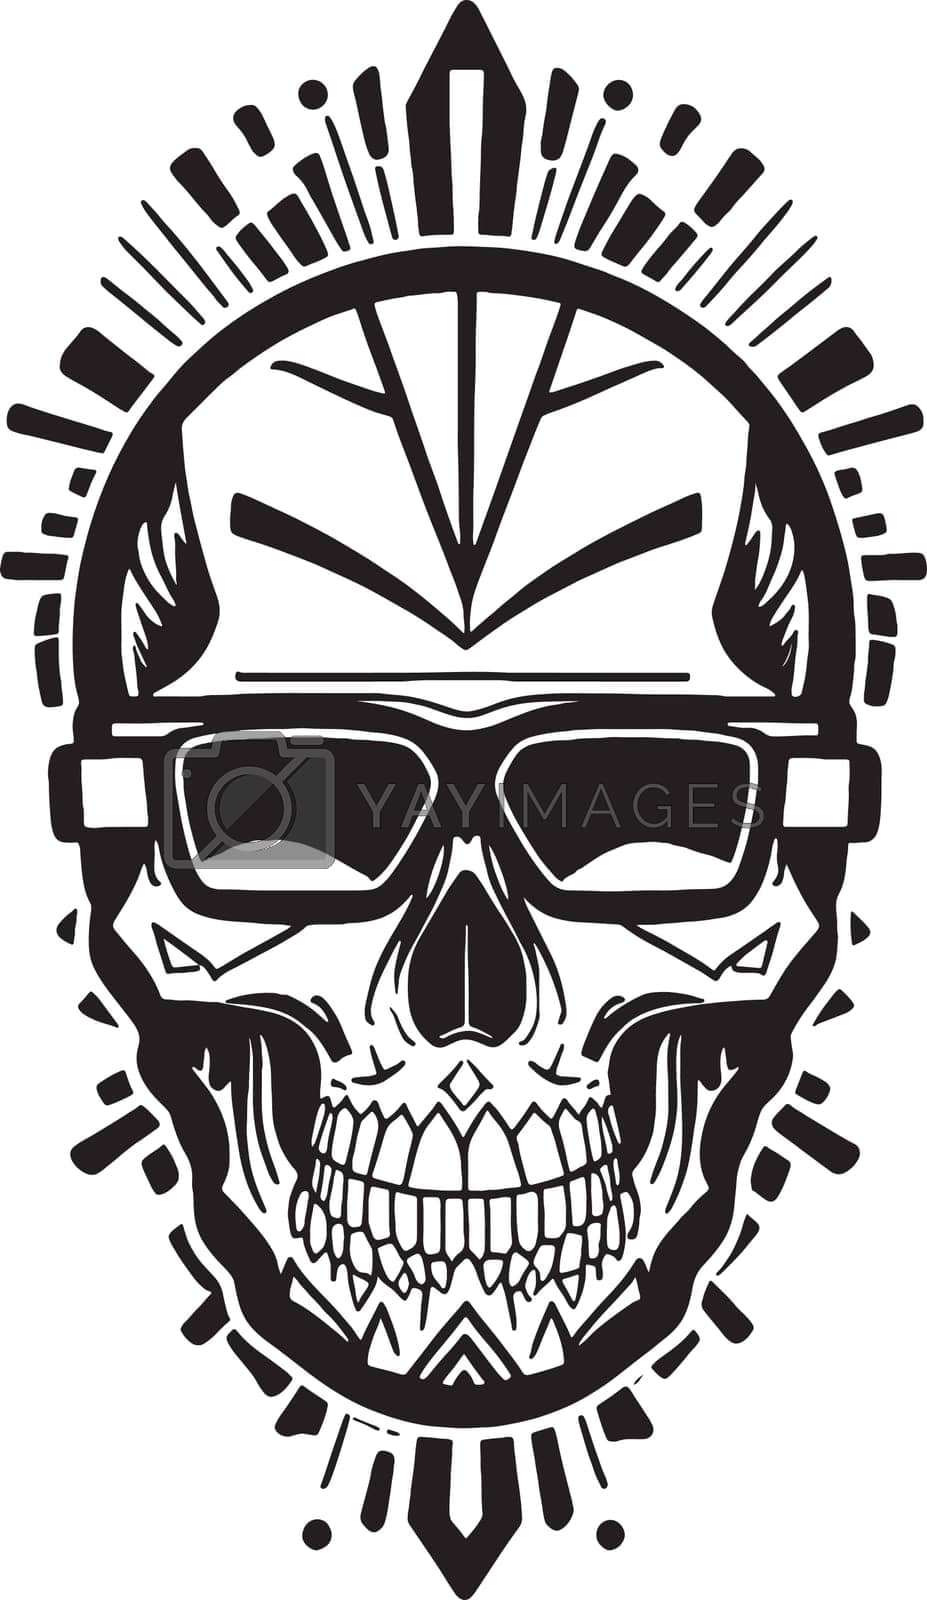 Royalty free image of Good looking fashion skull with glasses vector by luisalfonso89